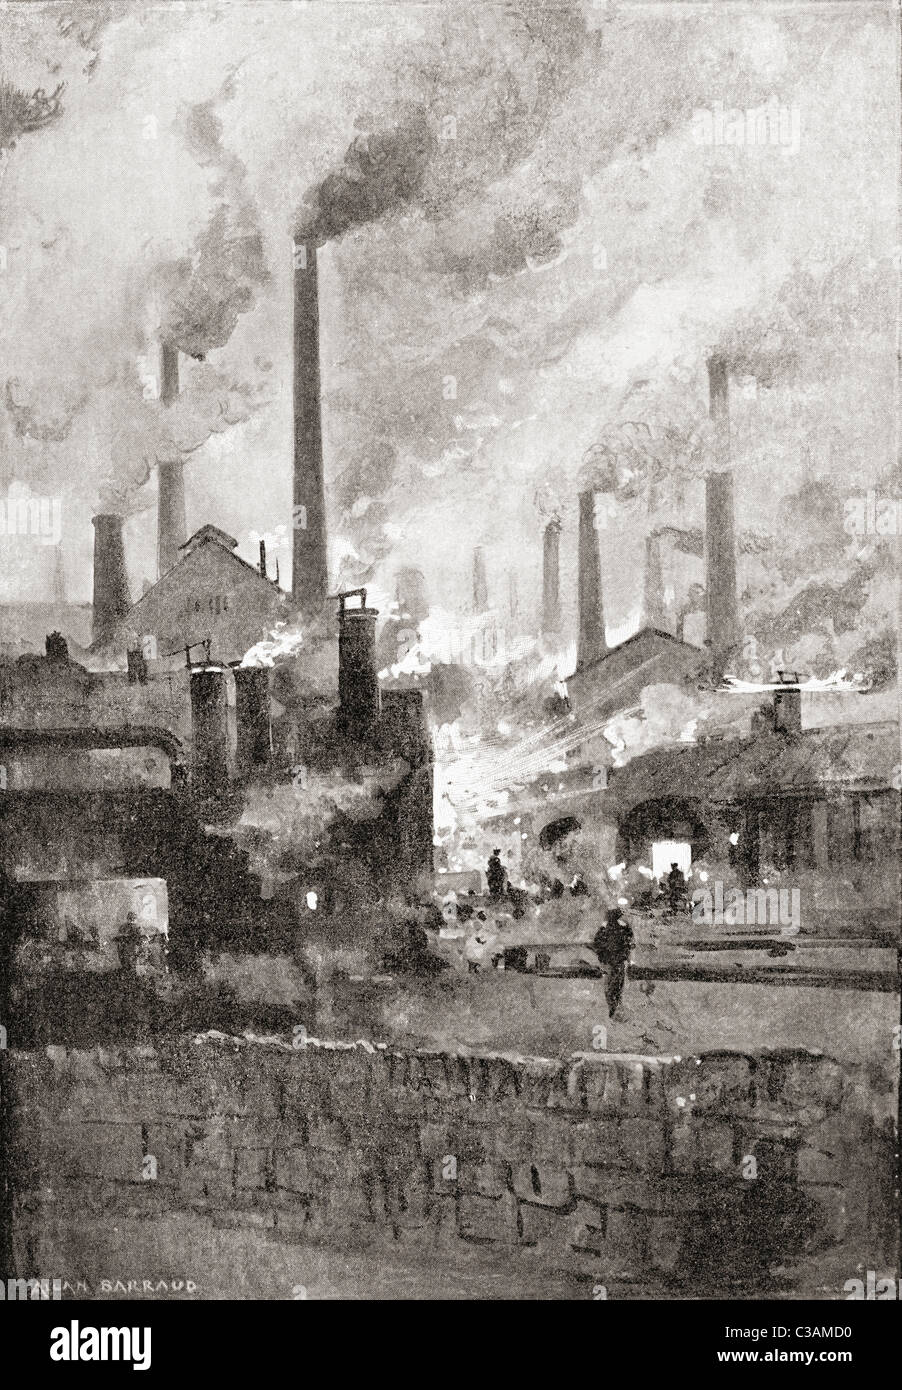 Smoking steel mills in Sheffield, South Yorkshire, England in the late19th century. Stock Photo